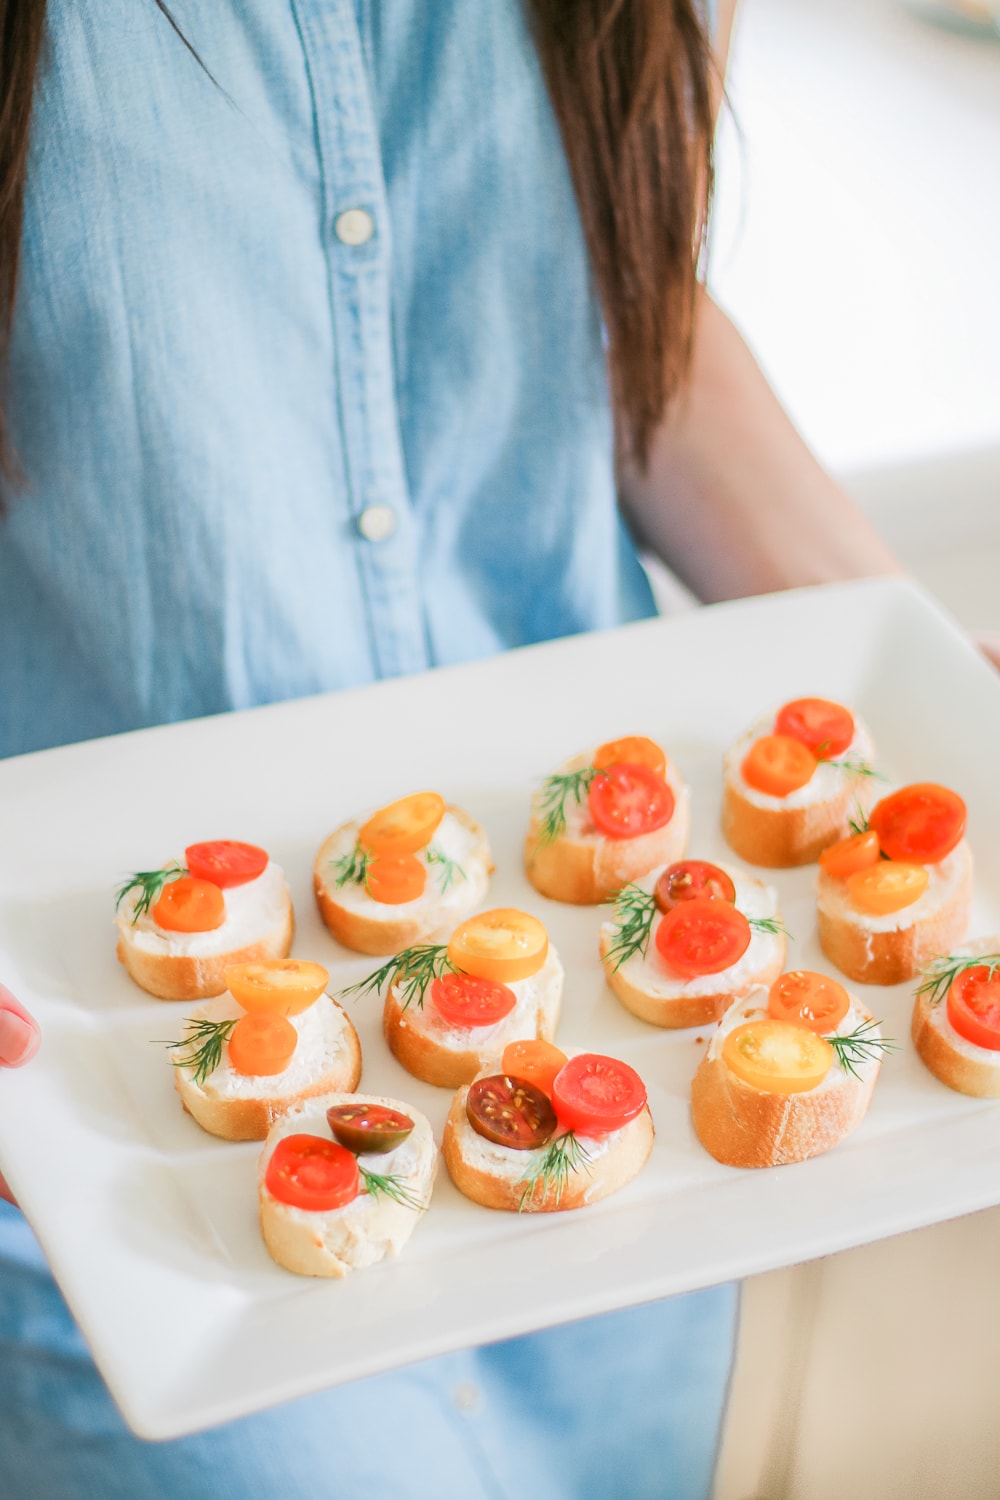 Southern lifestyle blogger Stephanie Ziajka shares one of her favorite easy appetizers to bring to a party on Diary of a Debutante